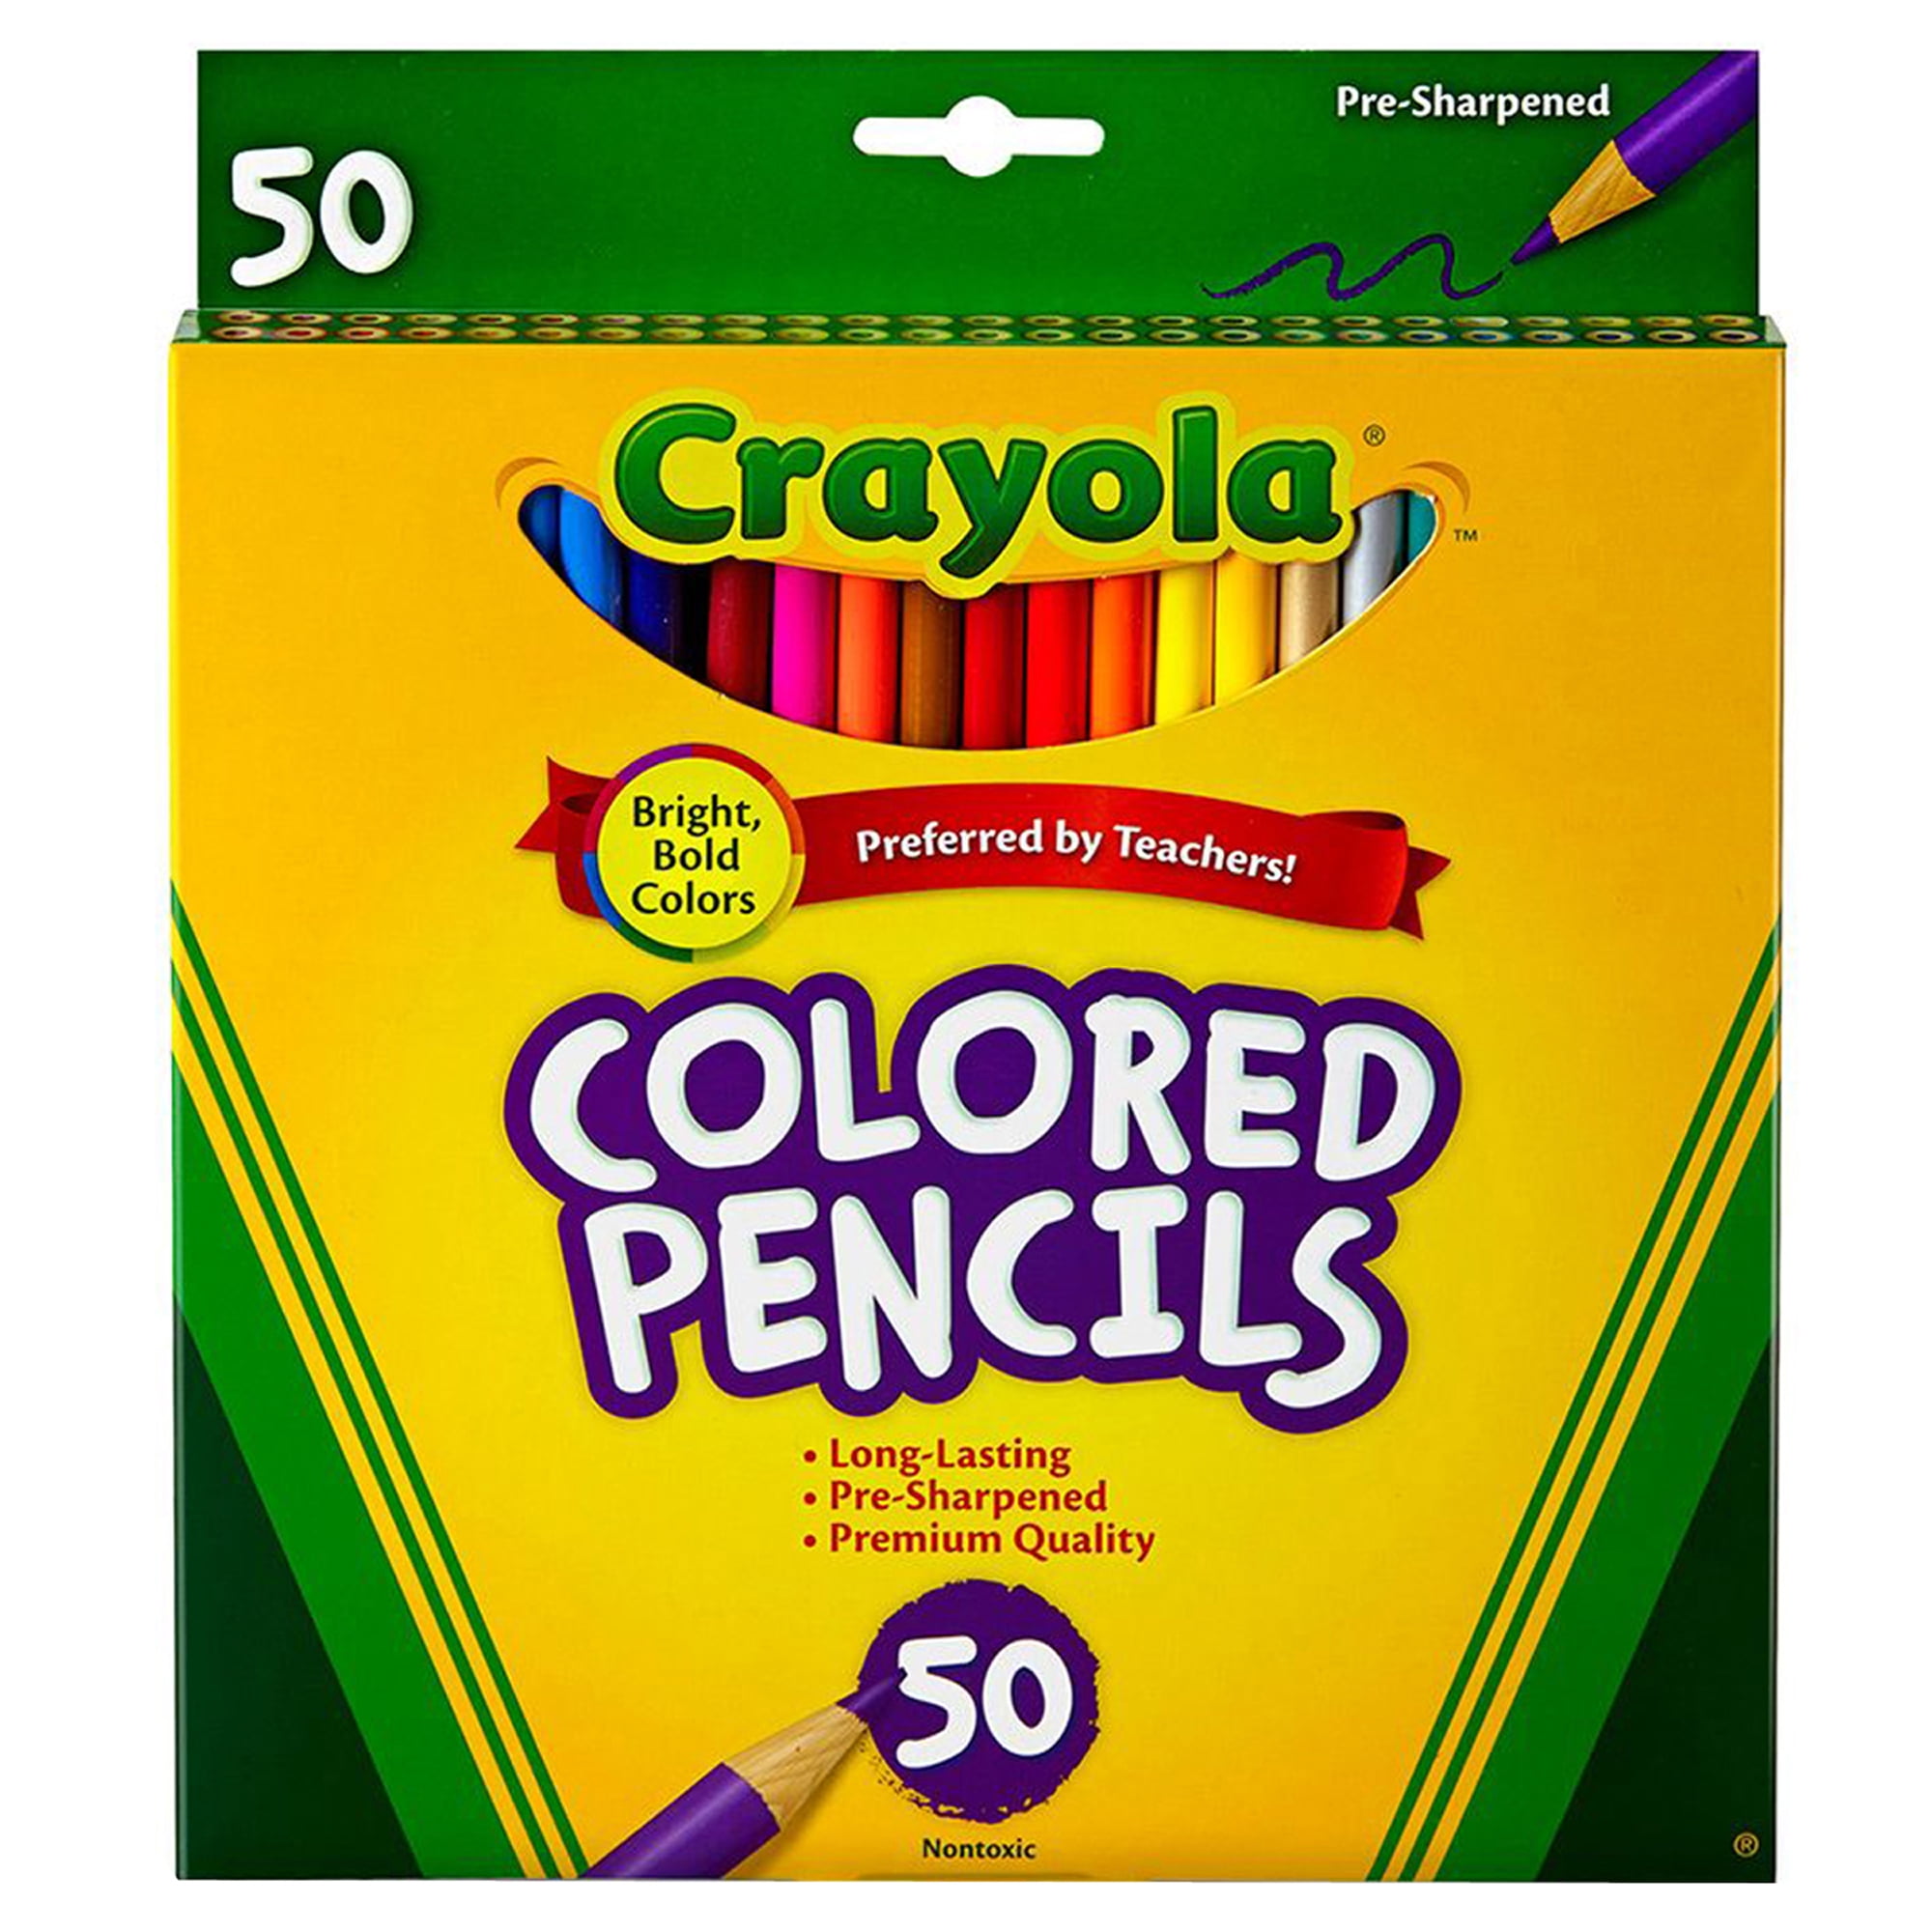  Crayola Colored Pencils For Adults (50 Count), Colored Pencil  Set, Pair With Adult Coloring Books, Art Supplies, Holiday Gifts [  Exclusive] : Toys & Games